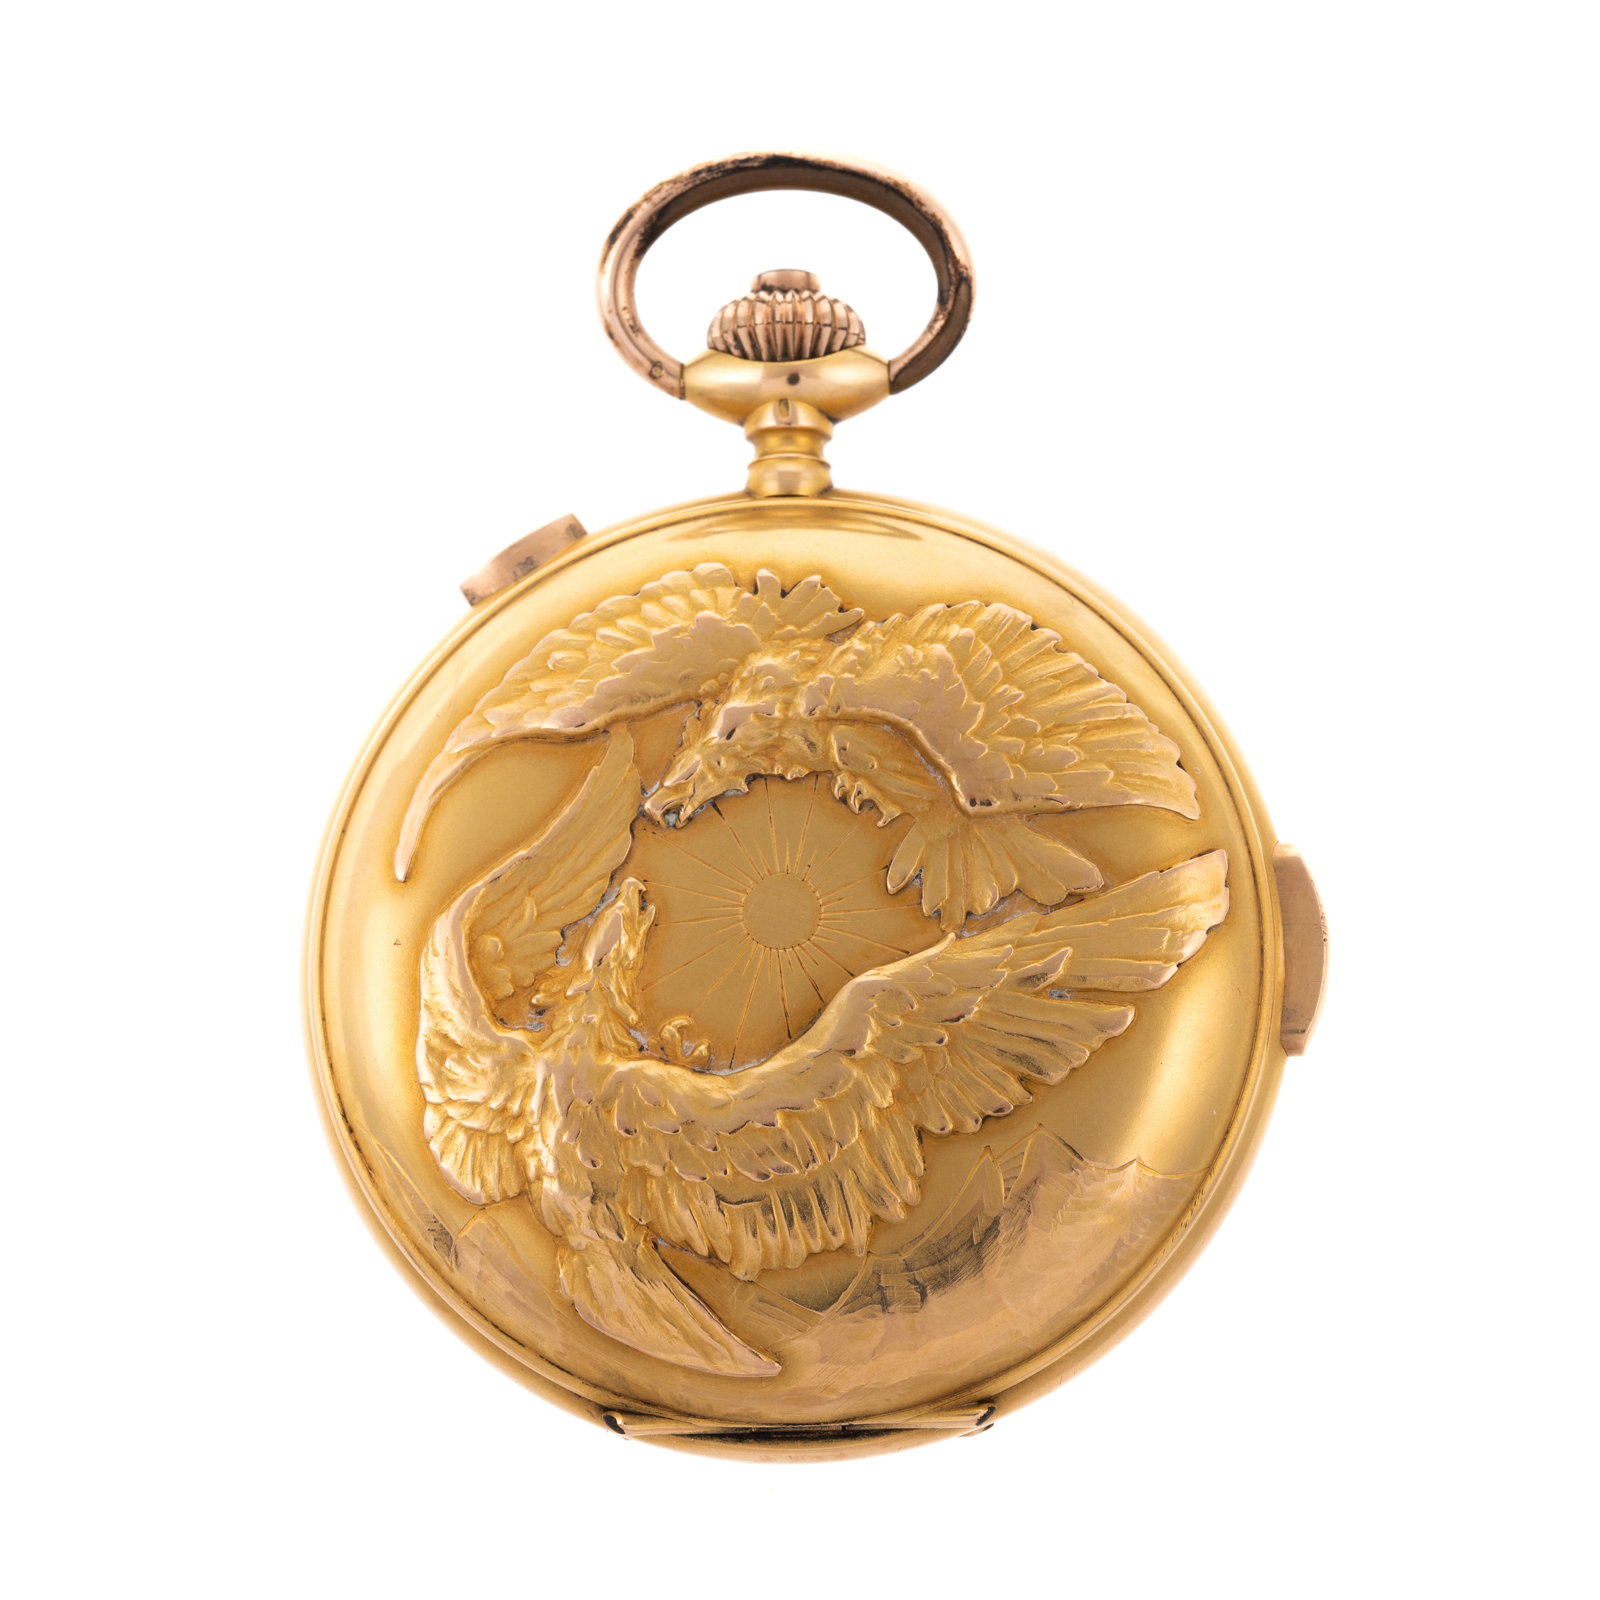 A C.1900 REPEATER POCKET WATCH